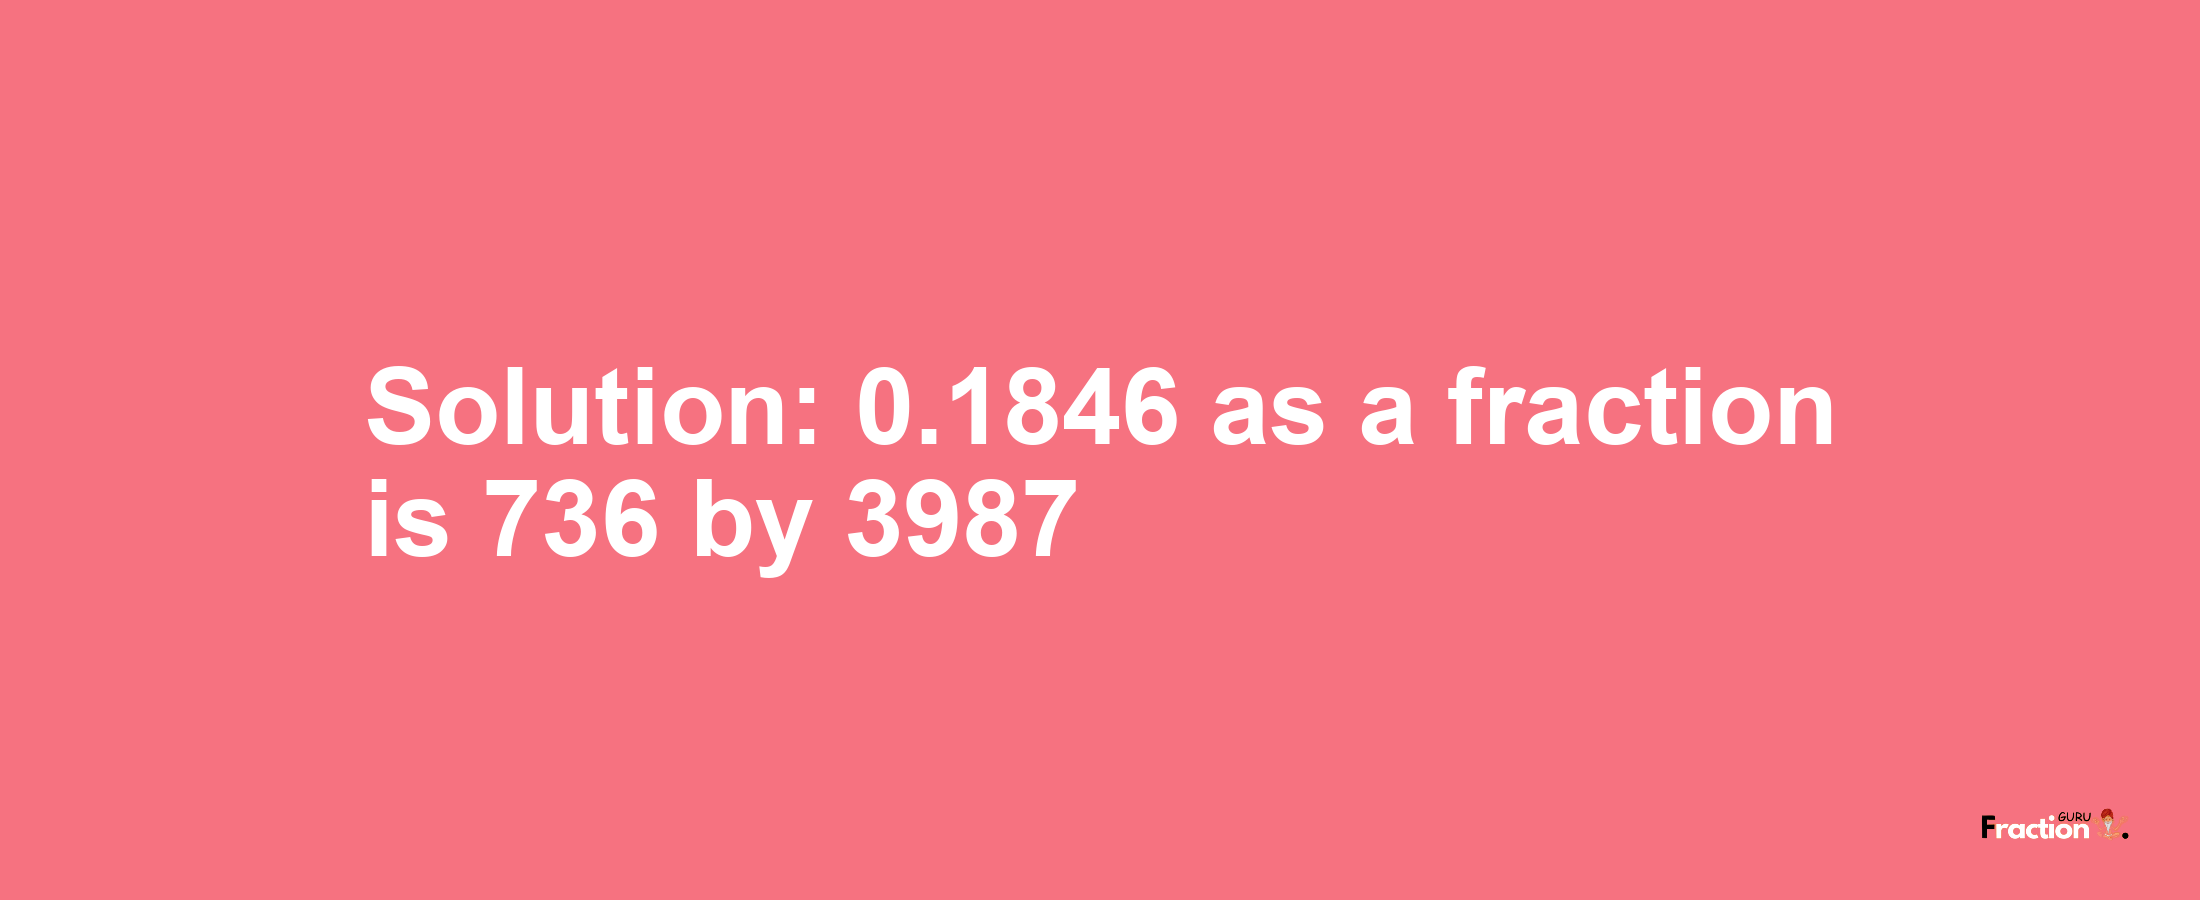 Solution:0.1846 as a fraction is 736/3987